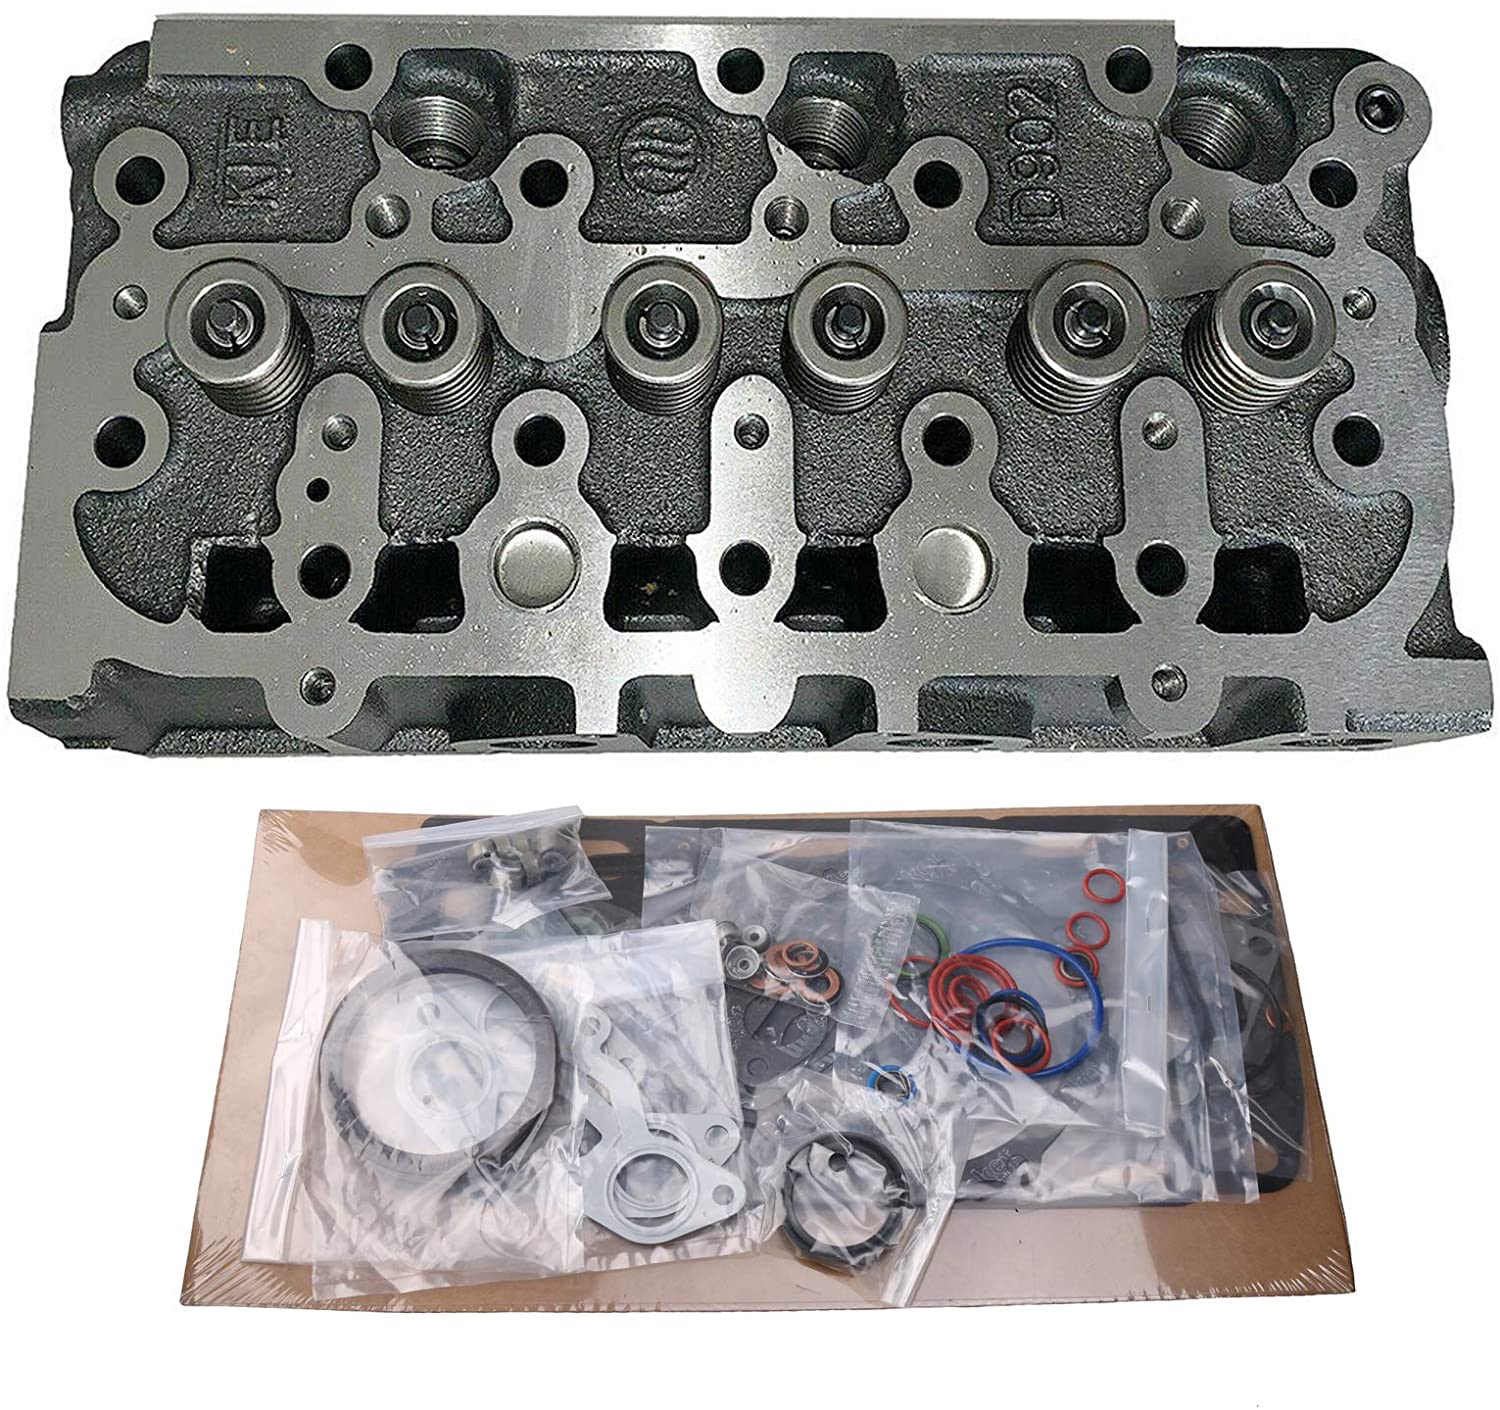 D902 Complete Cylinder Head with Valves & Full Gasket Fit for Kubota RTV900G RTV900G9 RTV900R RTV900R6 RTV900R9 RTV900T RTV900T5 RTV900T6 RTV900W RTV900W6 RTV900W6SE RTV900W9 RTV900W9 - KUDUPARTS